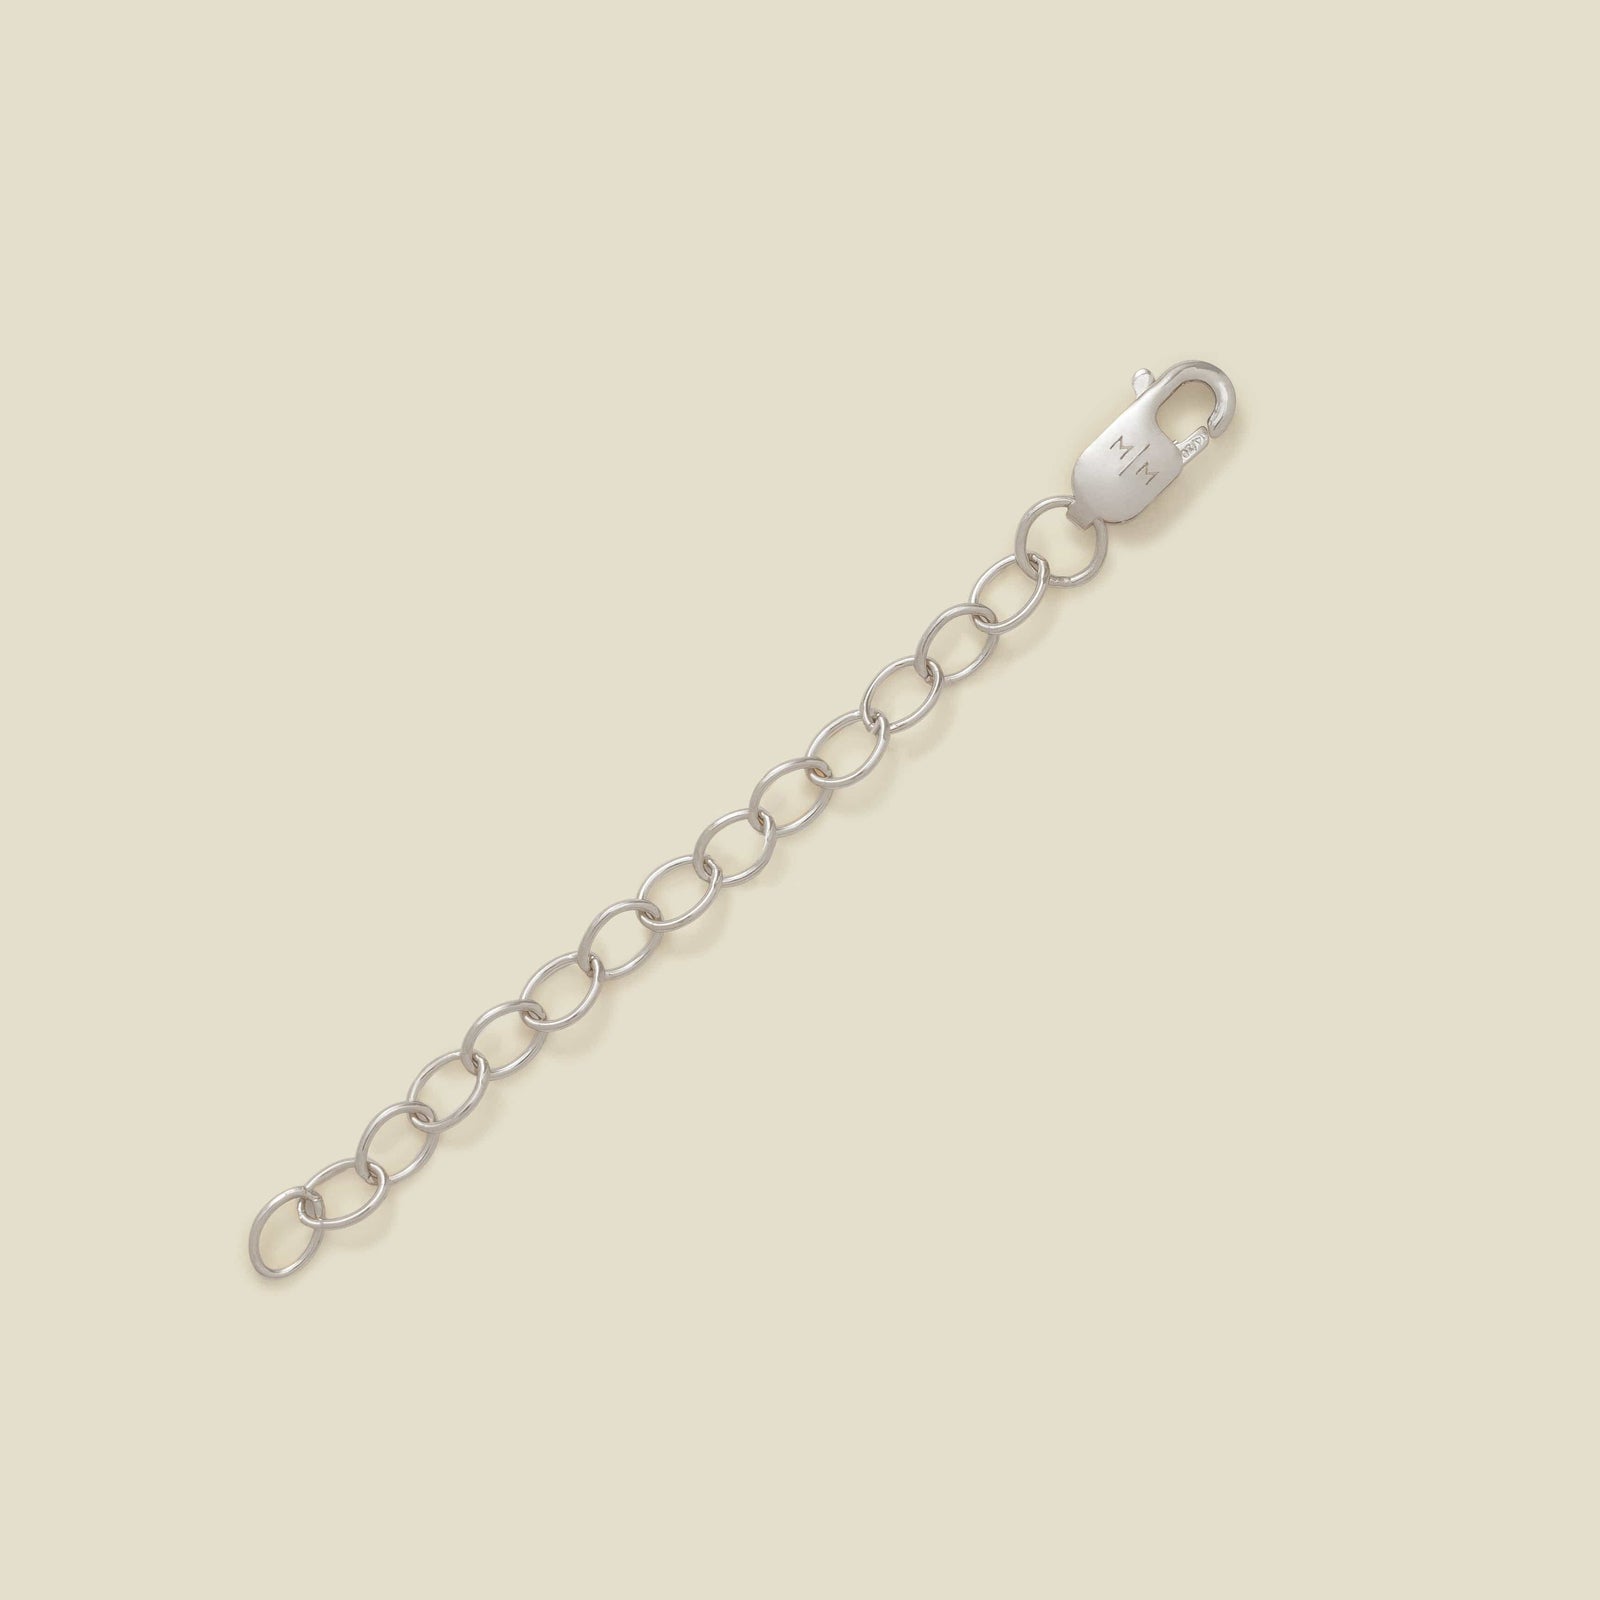 Detachable Chain Extender Add-on Silver / 2.0" Add Ons